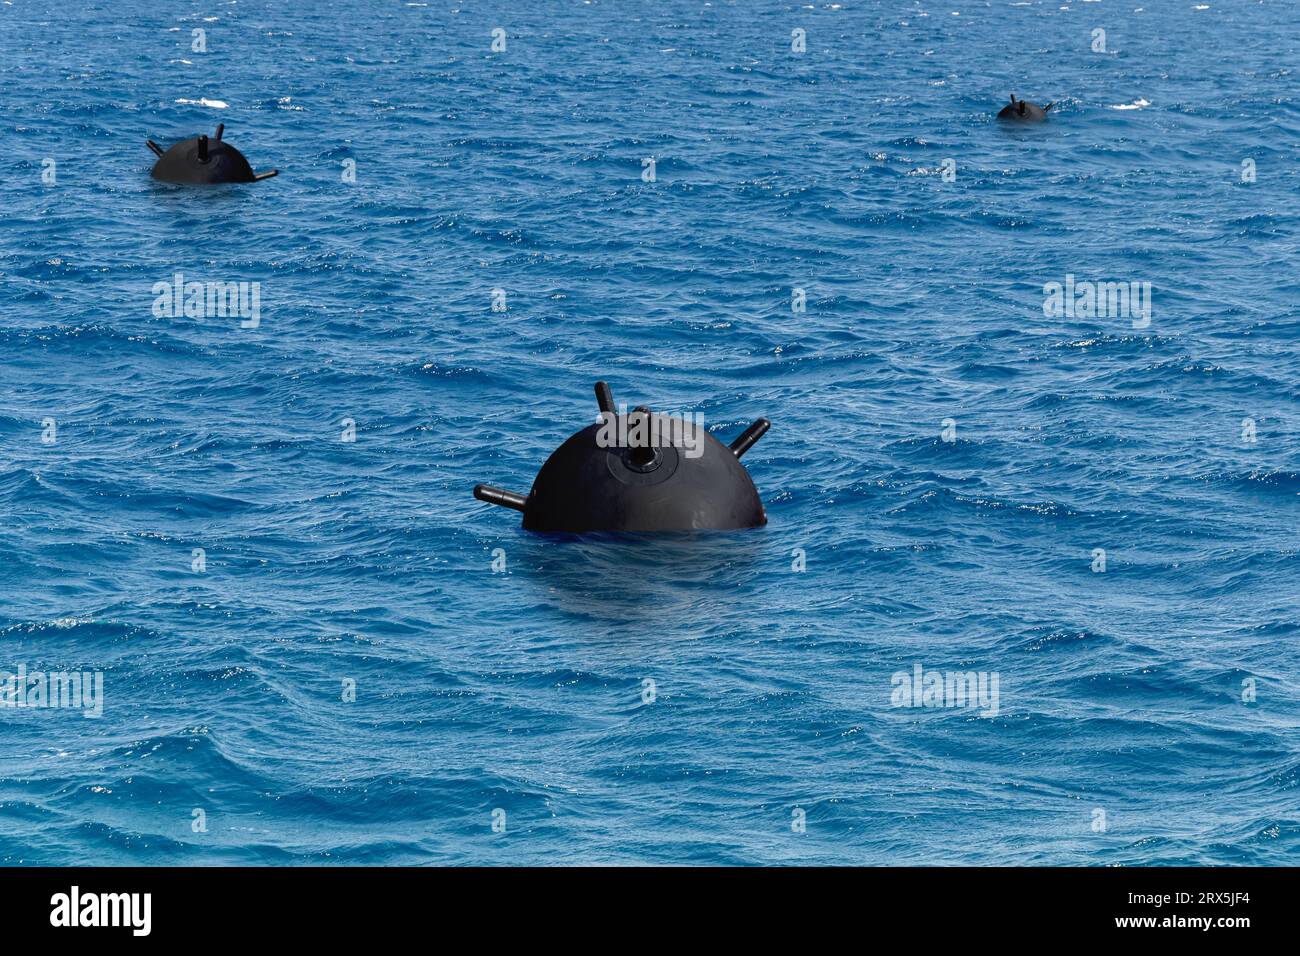 Military sea mines in the sea, MINE FENCE, anti-ship mines. Concept: war in Ukraine, mine barrages, danger in water. Stock Photo